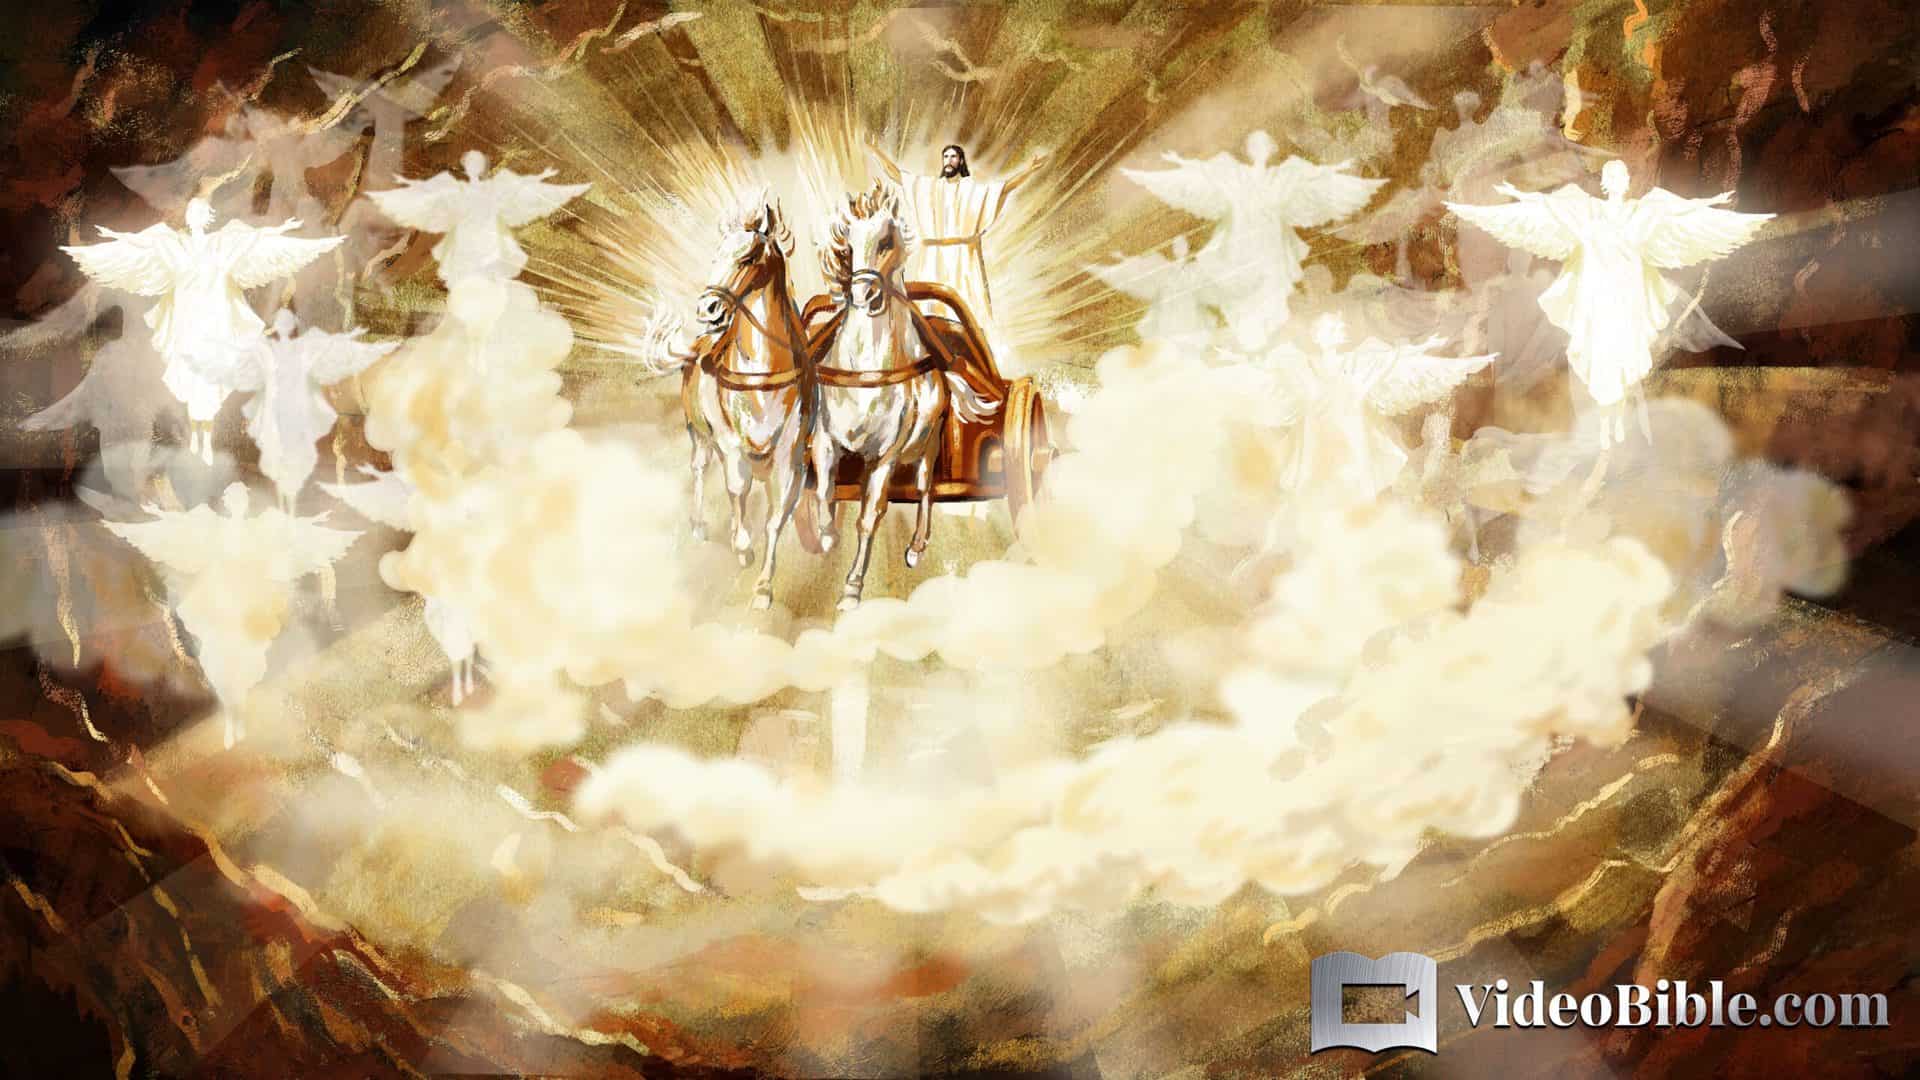 Jesus riding a chariot in heaven surrounded by angels